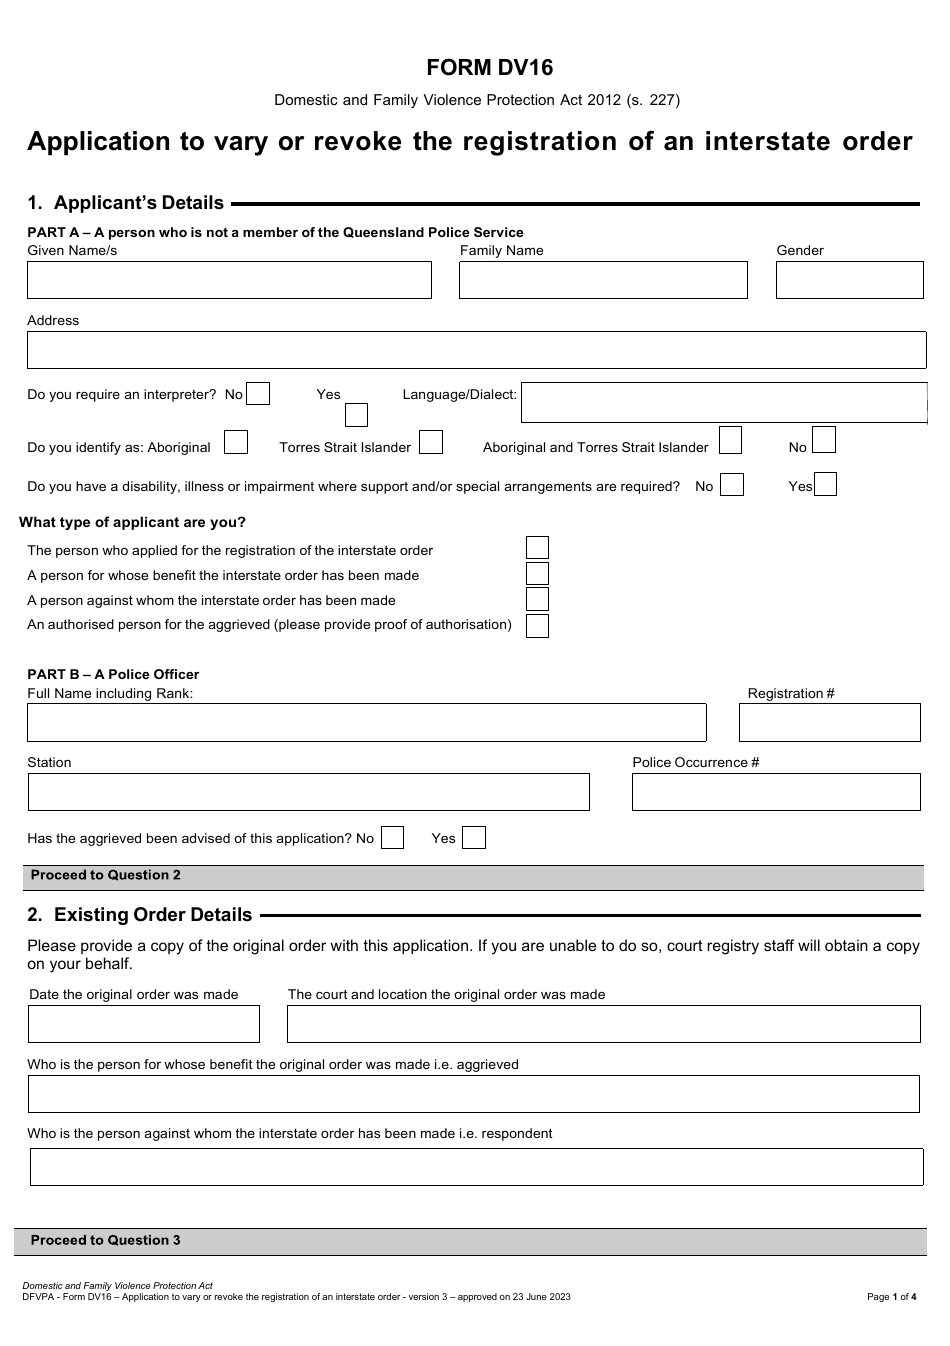 Form DV16 Application to Vary or Revoke the Registration of an Interstate Order - Queensland, Australia, Page 1